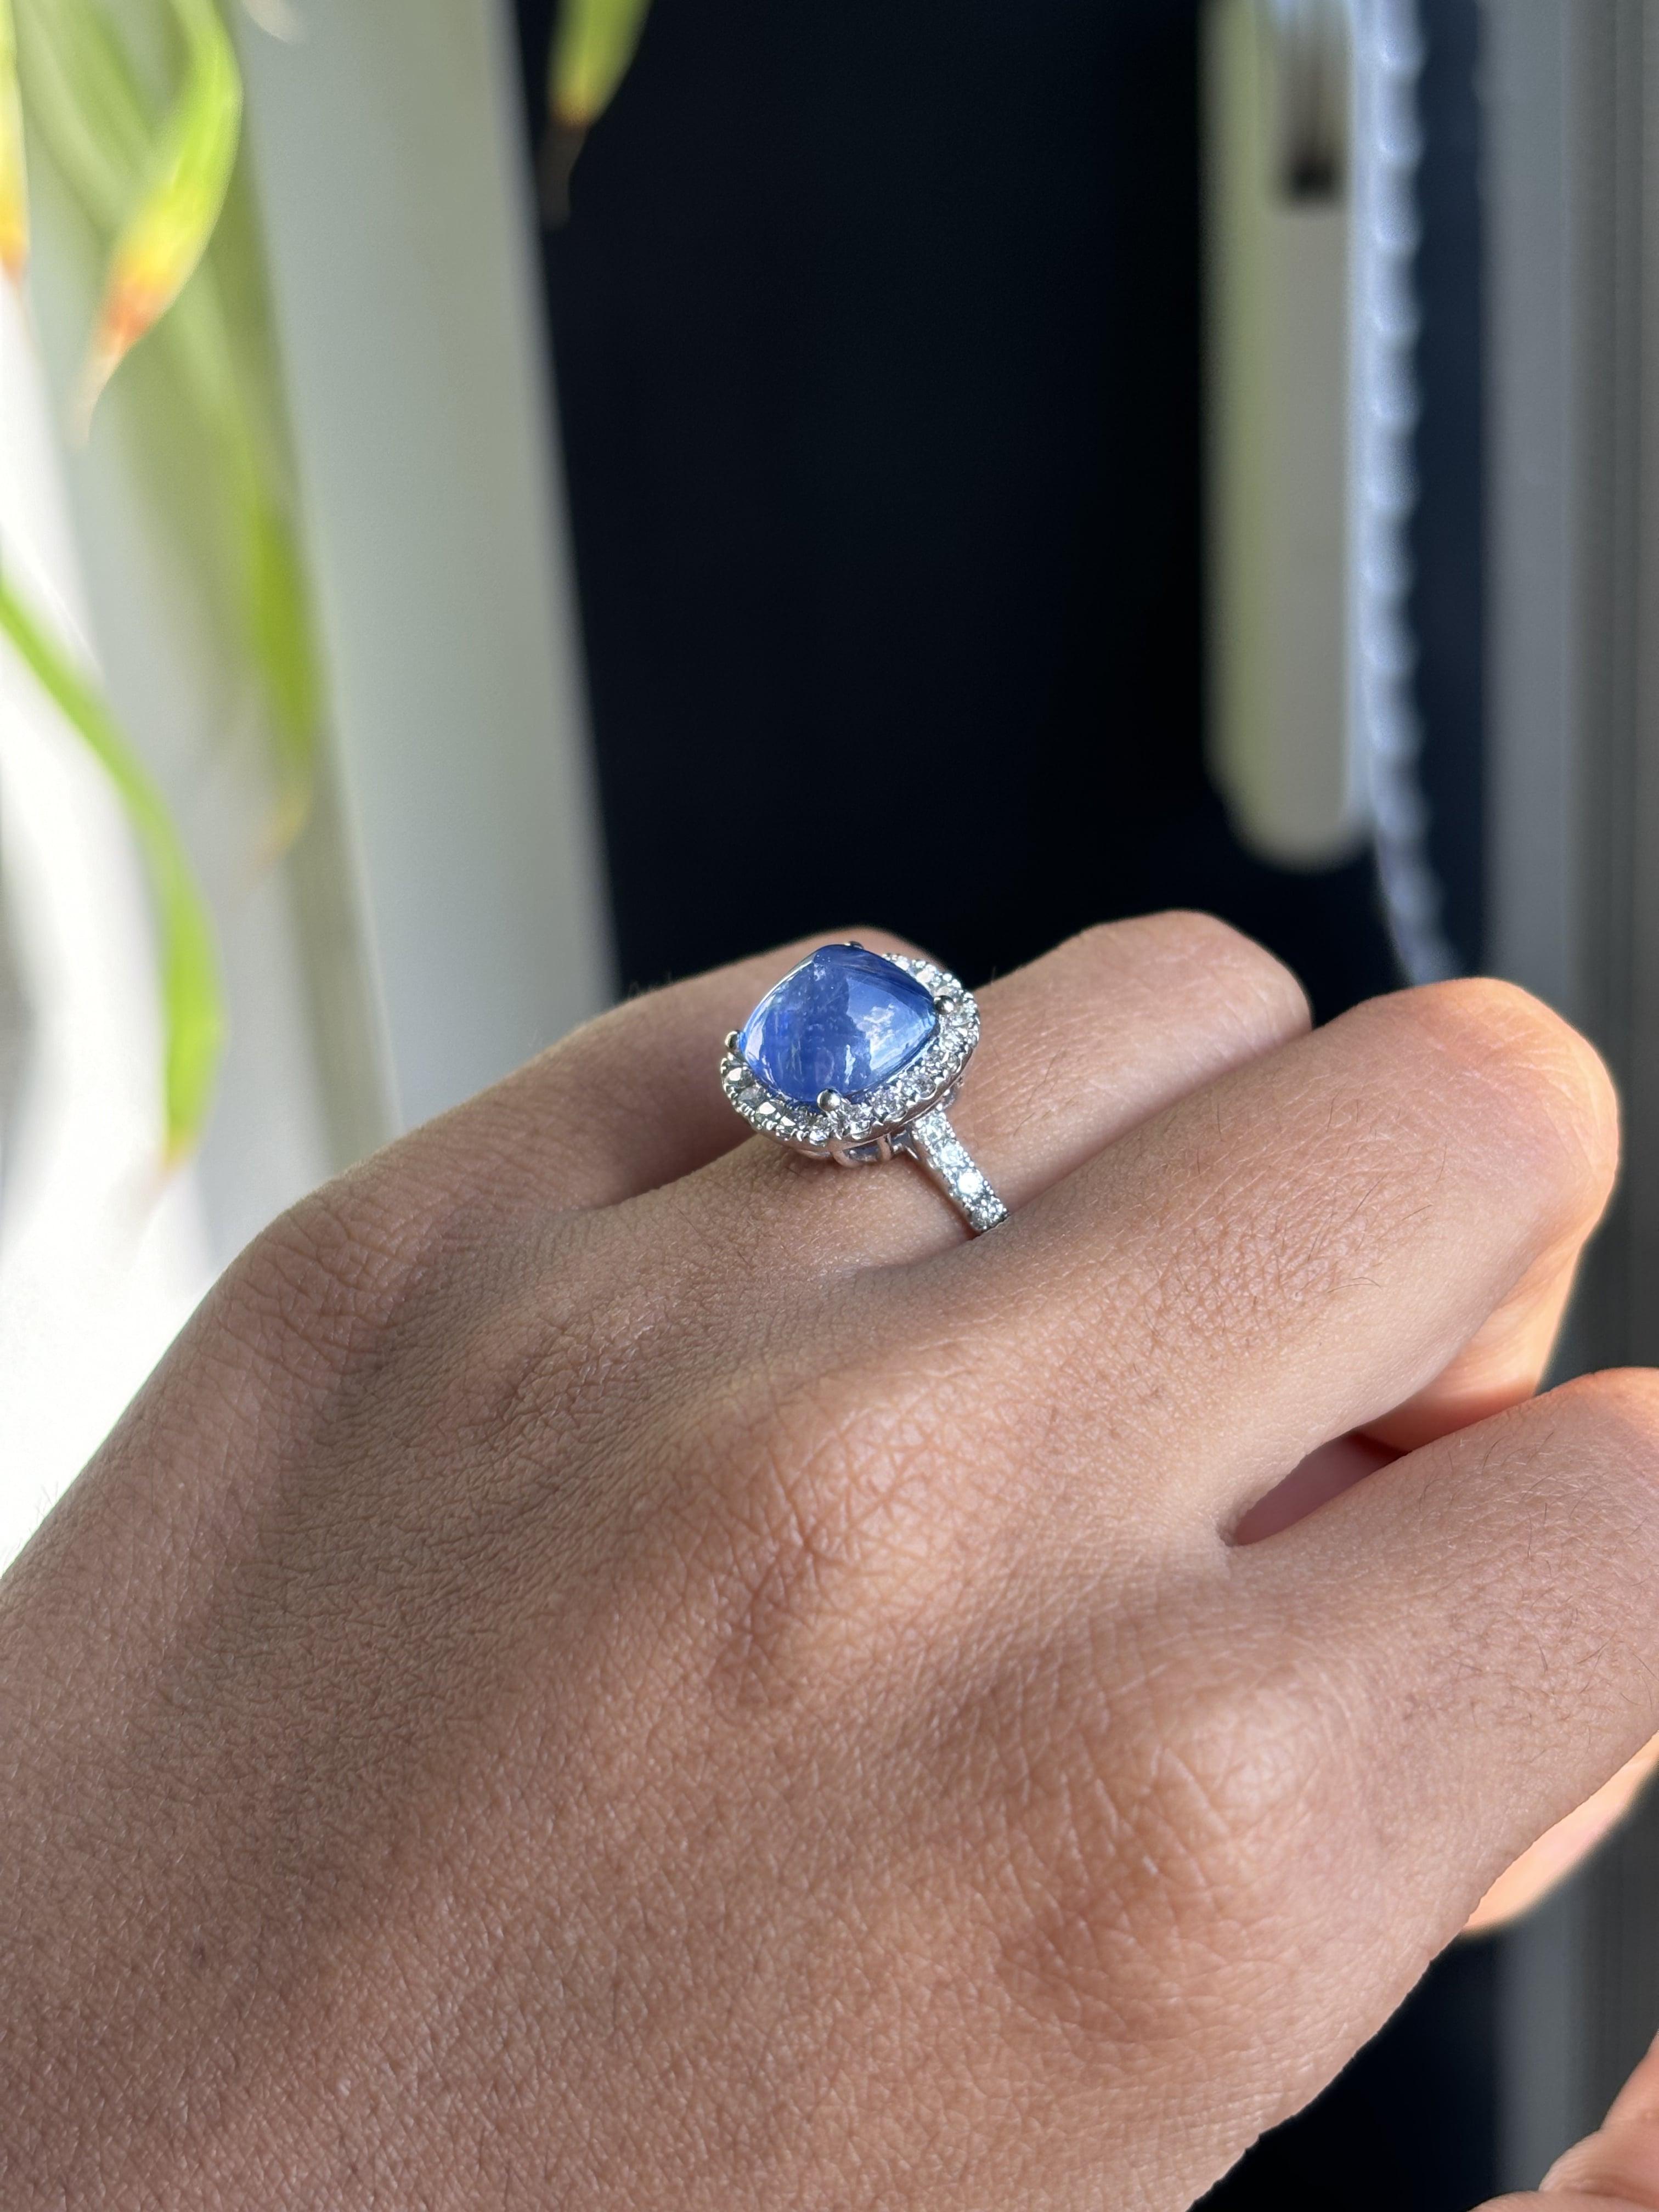 4.23 Carat Sugarloaf Ceylon Sapphire Ring with Halo Diamonds in 14K White Gold For Sale 6